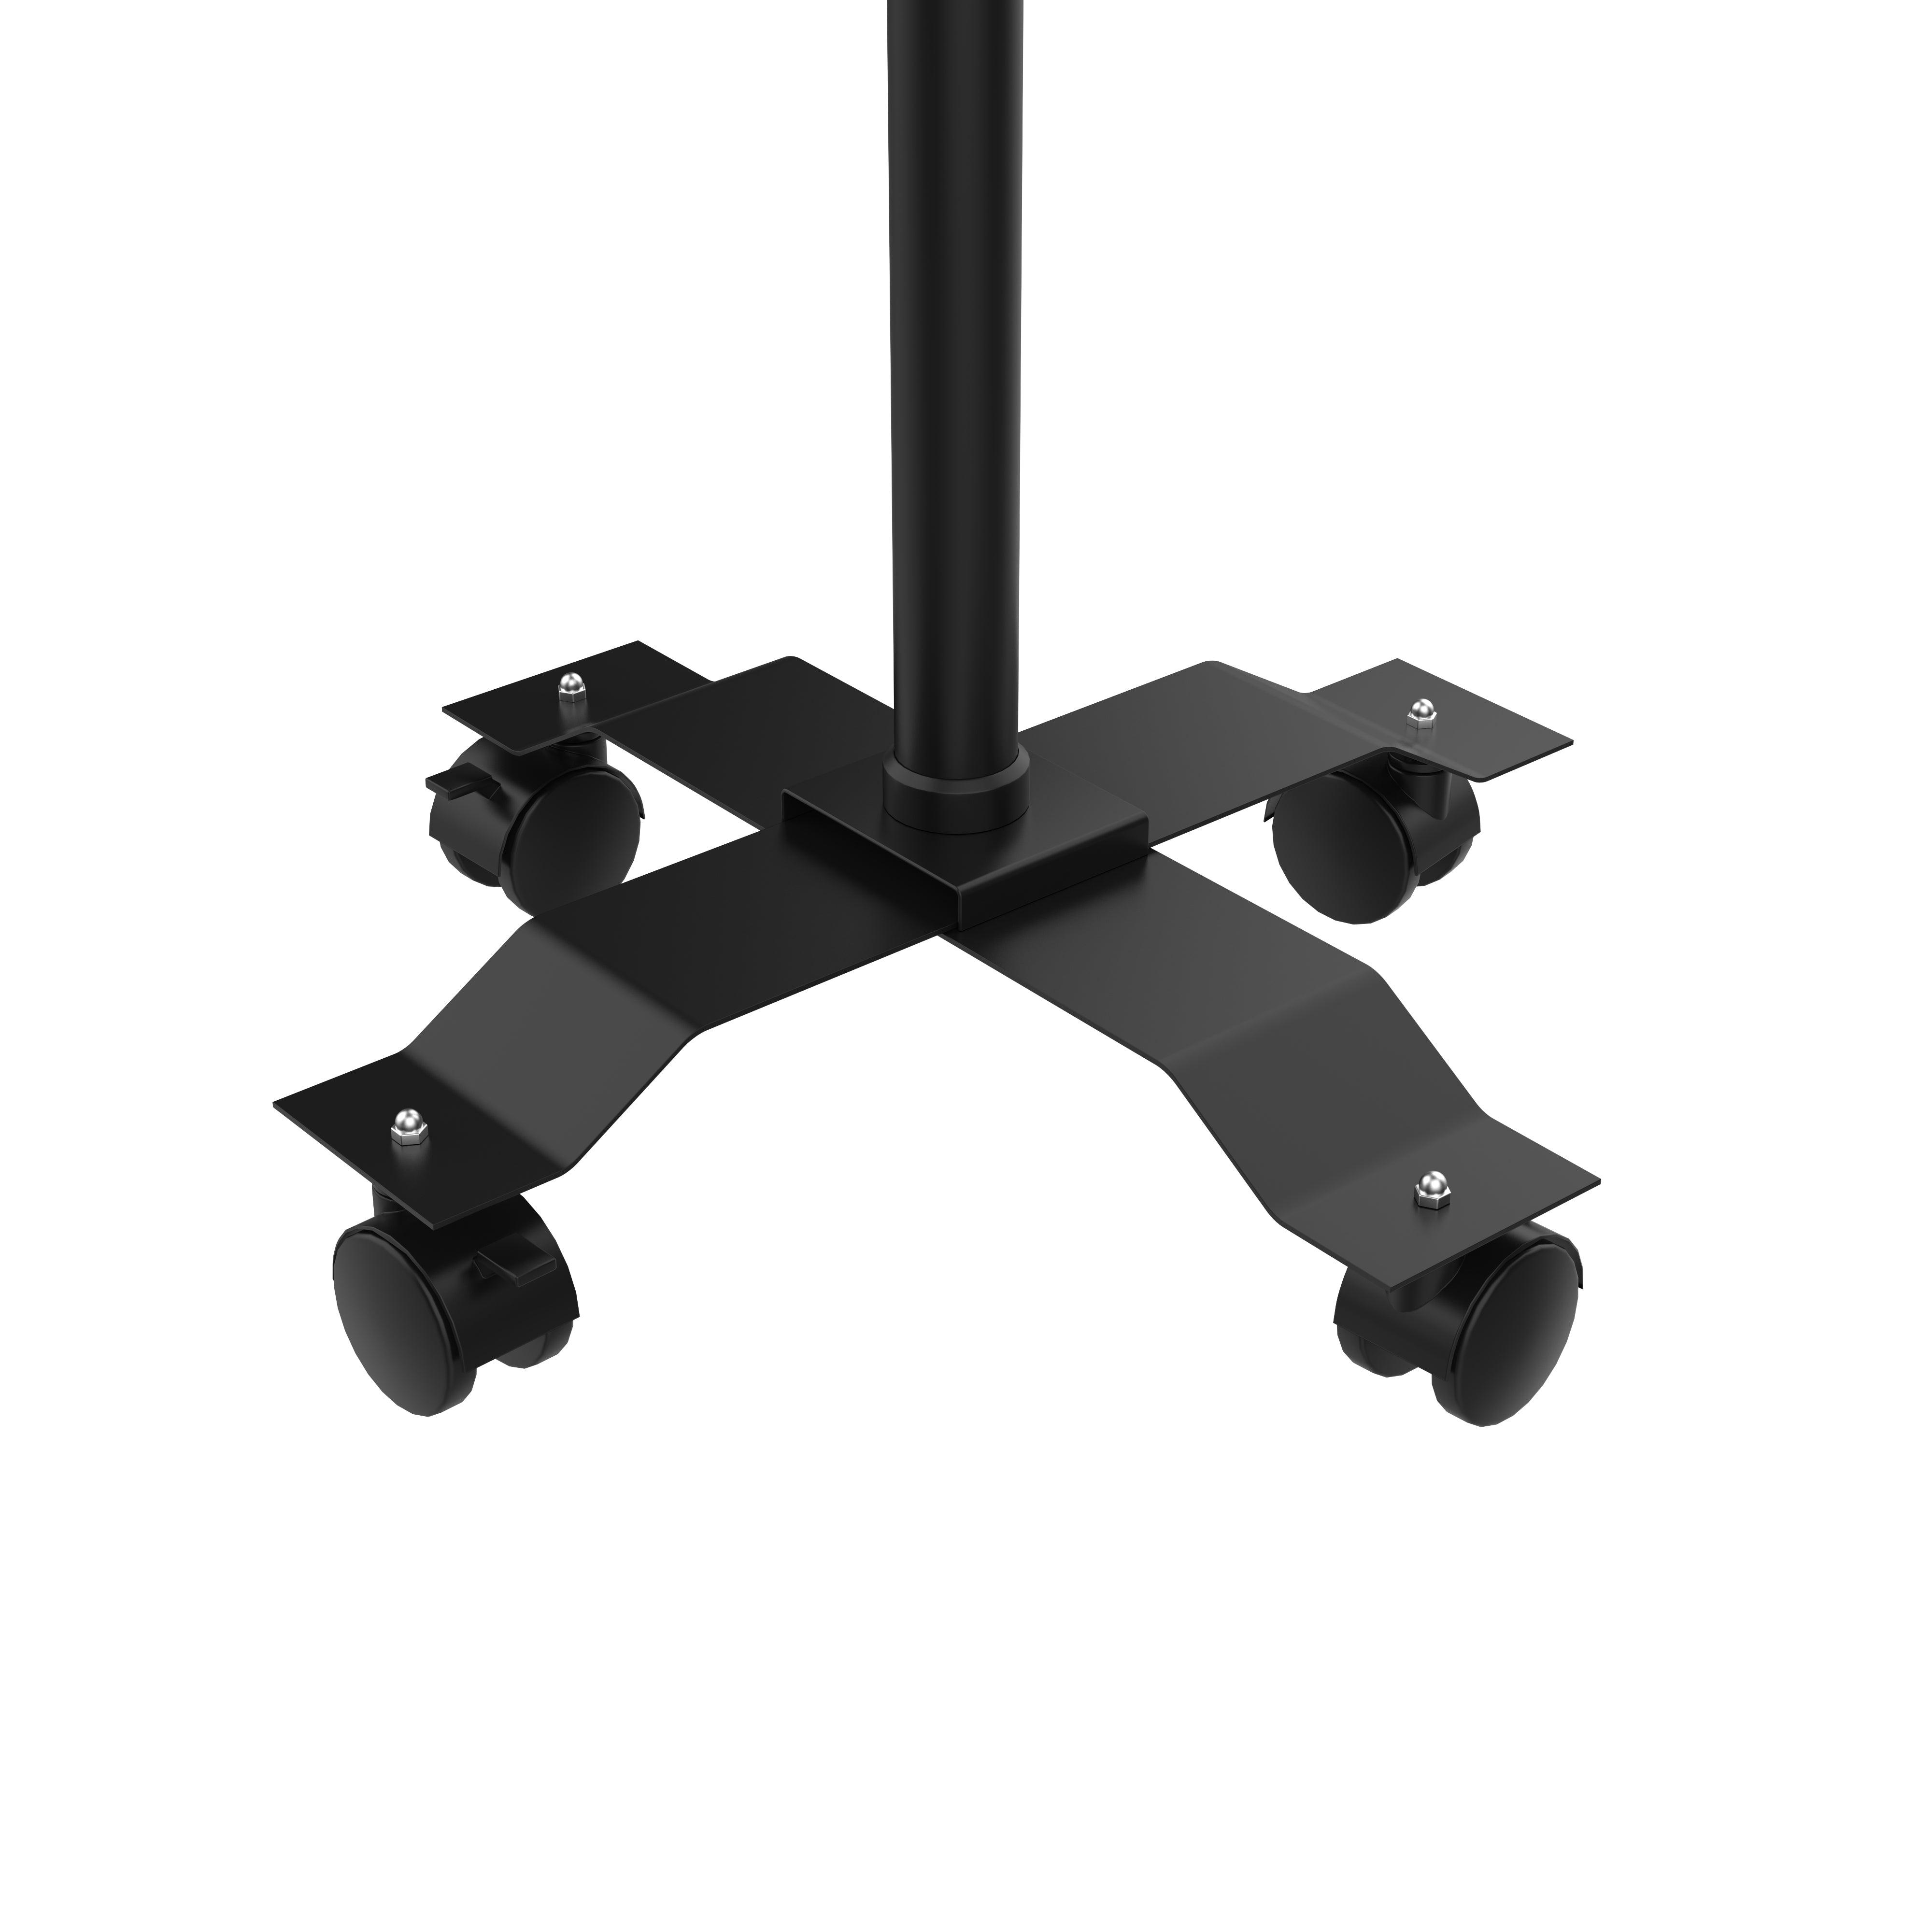 Compact Security Gooseneck Floor Stand for 7 - 13 Inch Tablets